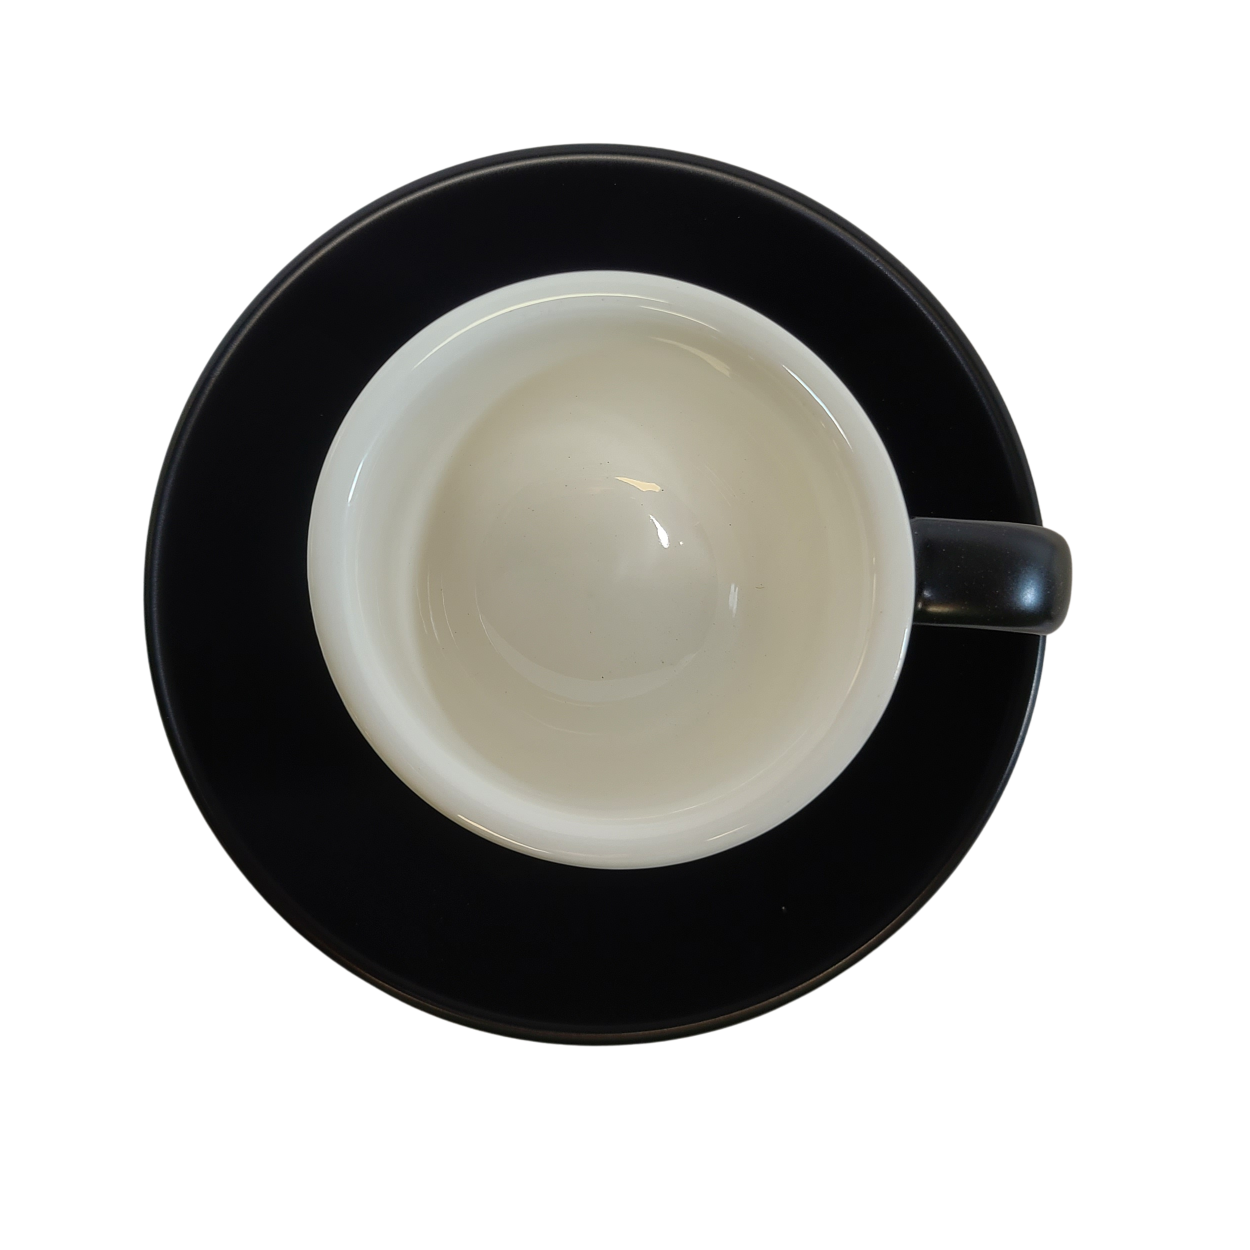 Coffee Addicts commercial ceramic cup with saucer in matte black espresso cup 2.7oz 80ml top view